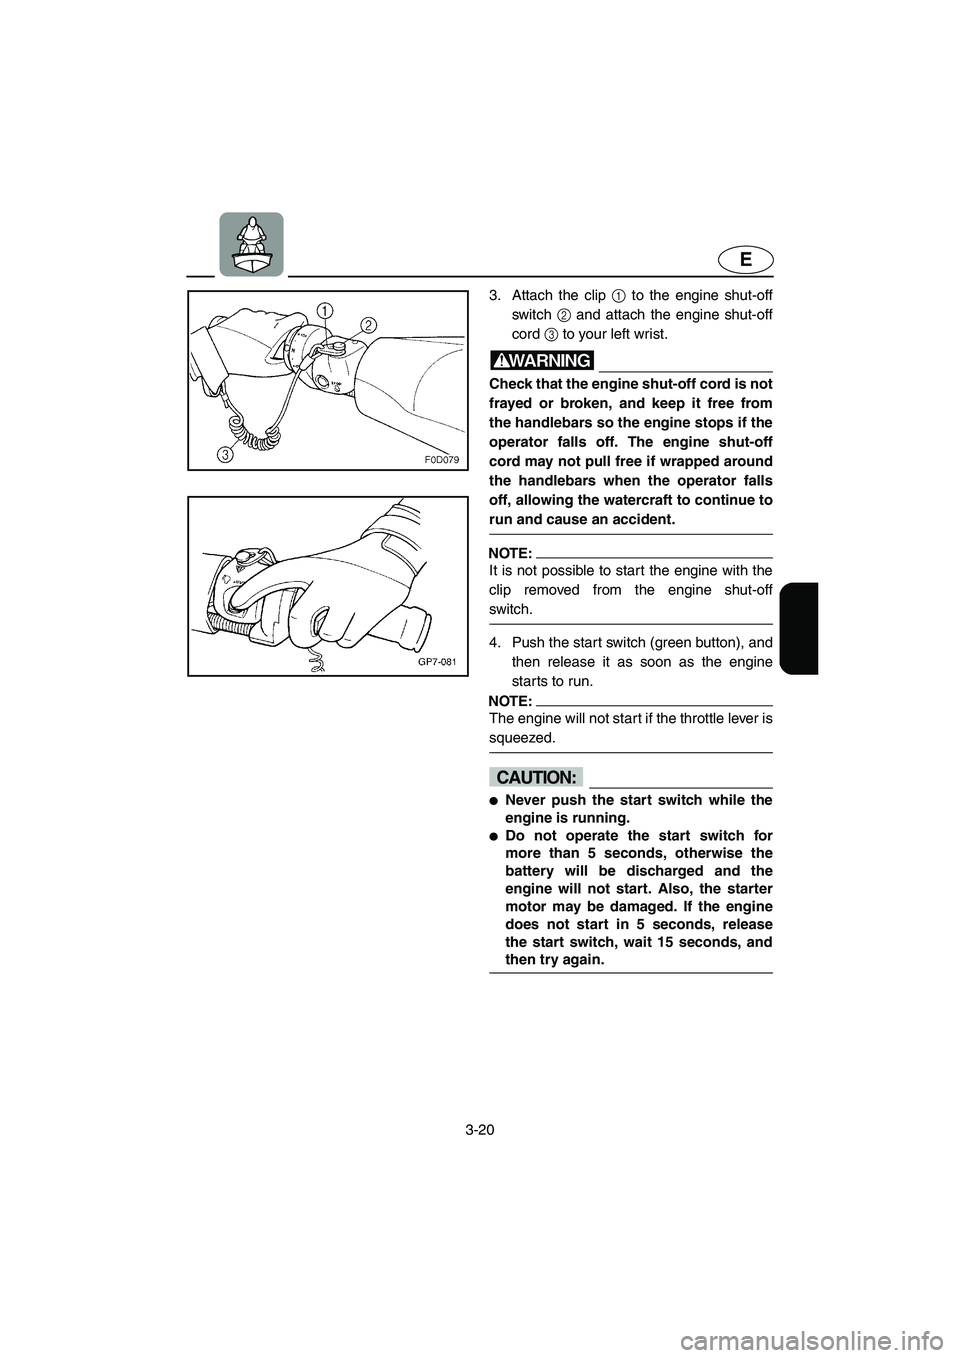 YAMAHA FX HO 2006 Manual Online 3-20
E
3. Attach the clip 1 to the engine shut-off
switch 2 and attach the engine shut-off
cord 3 to your left wrist.
WARNING@ Check that the engine shut-off cord is not
frayed or broken, and keep it 